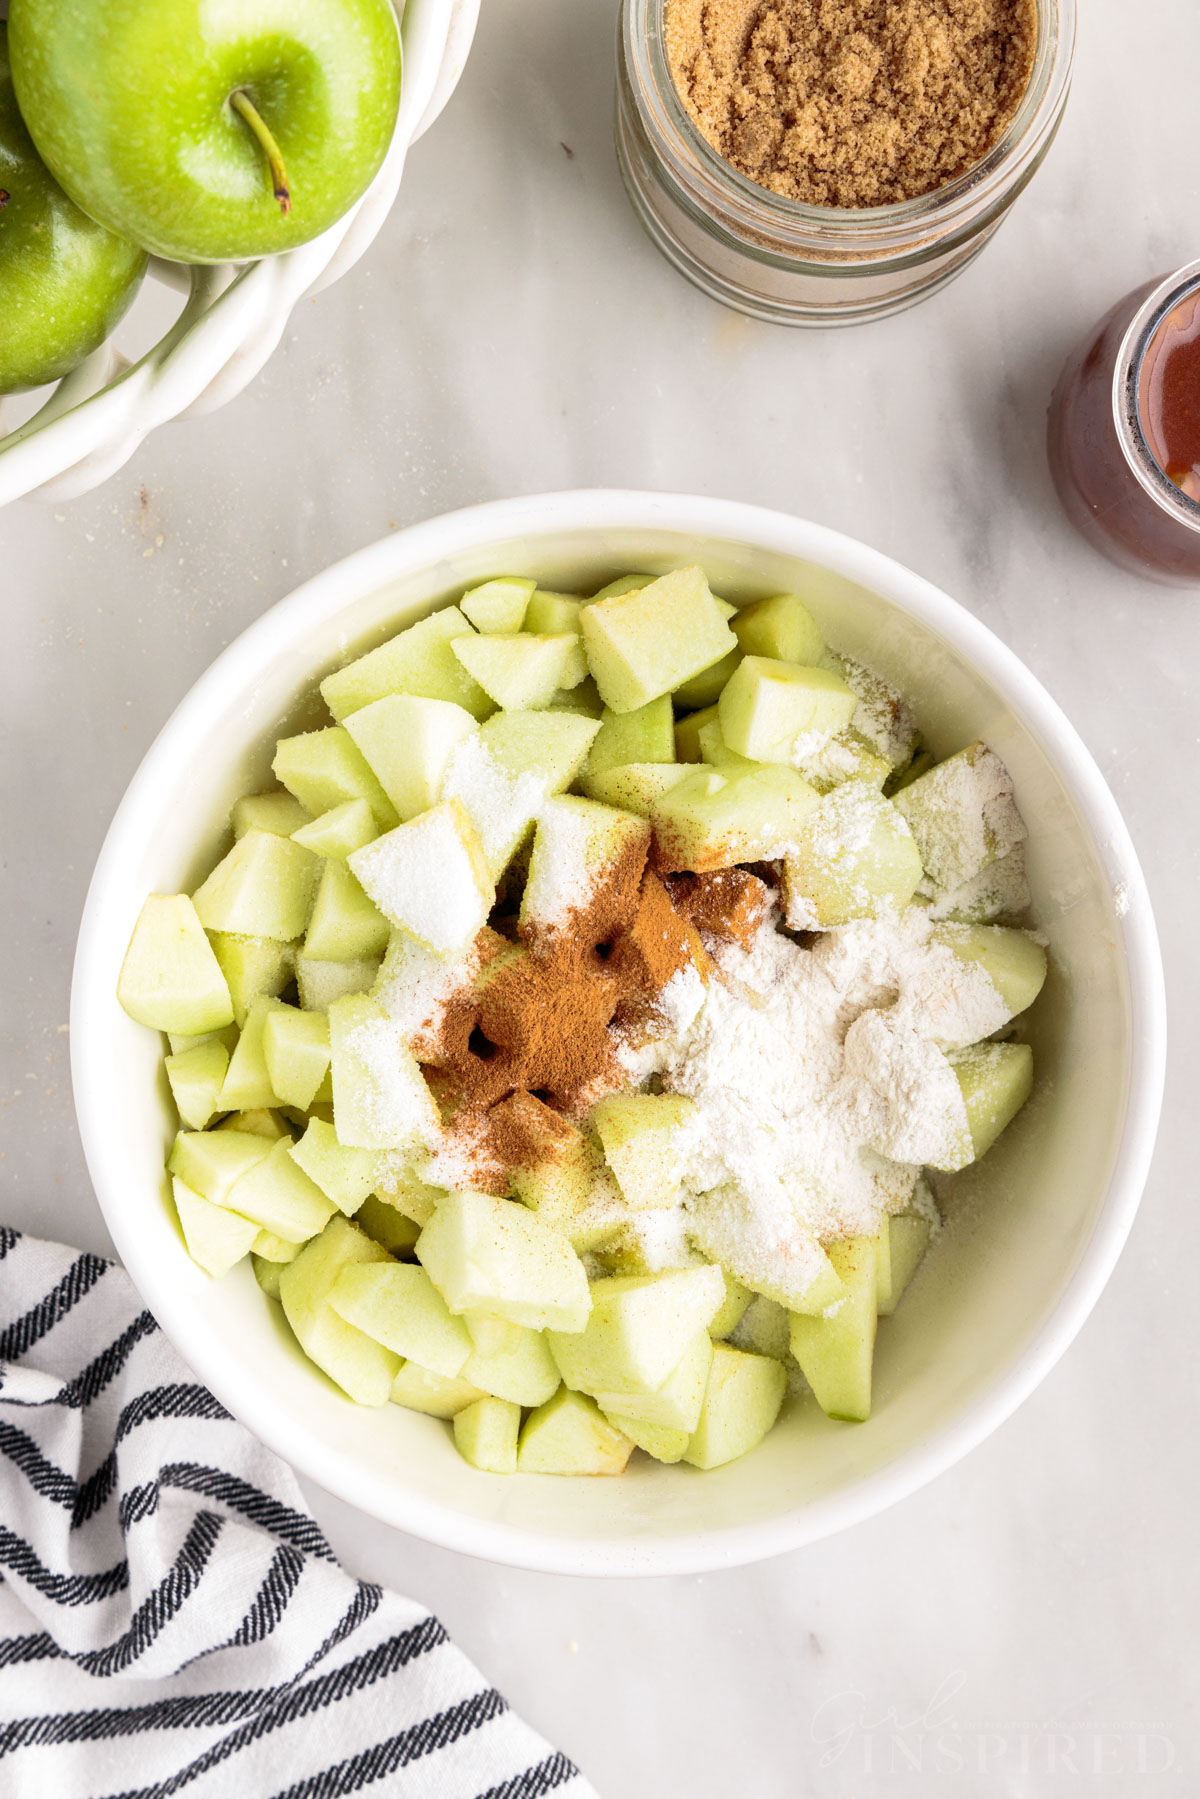 Sugar, flour, and cinnamon sprinkled over diced apples in bowl.